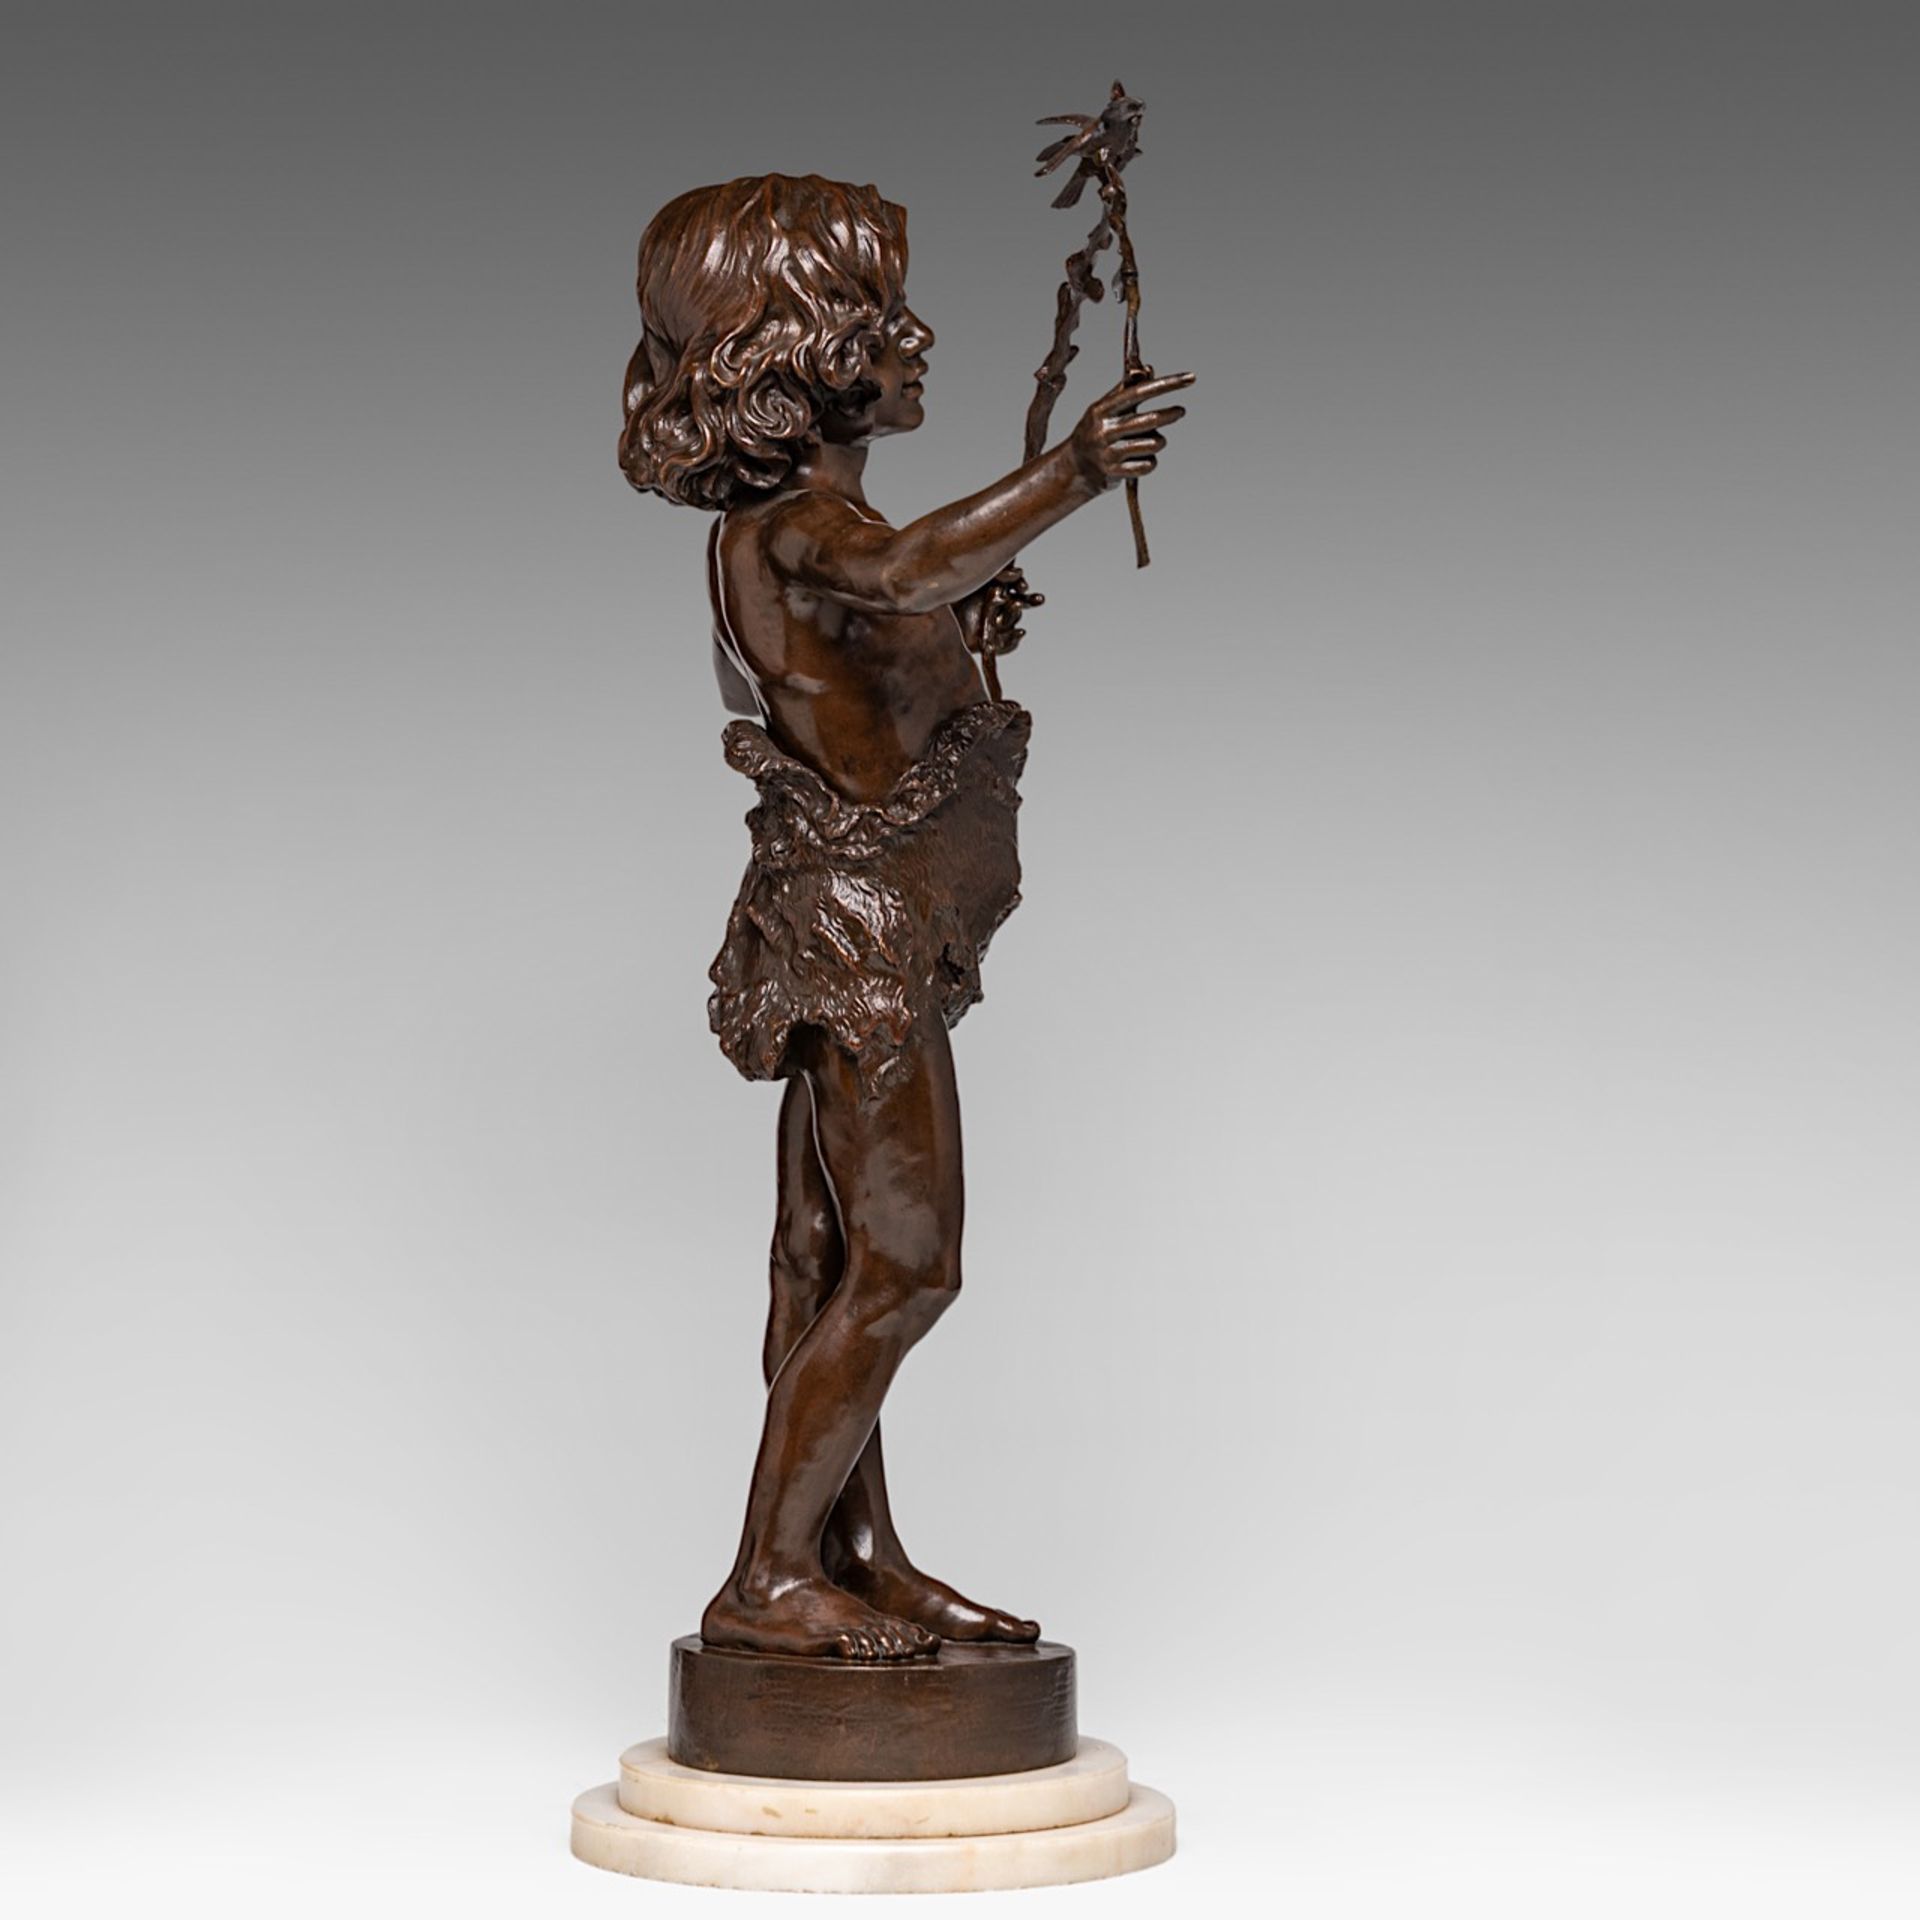 Marcel Debut (1865-1933), boy playing with birds, patinated bronze, H 70 cm - Image 5 of 6